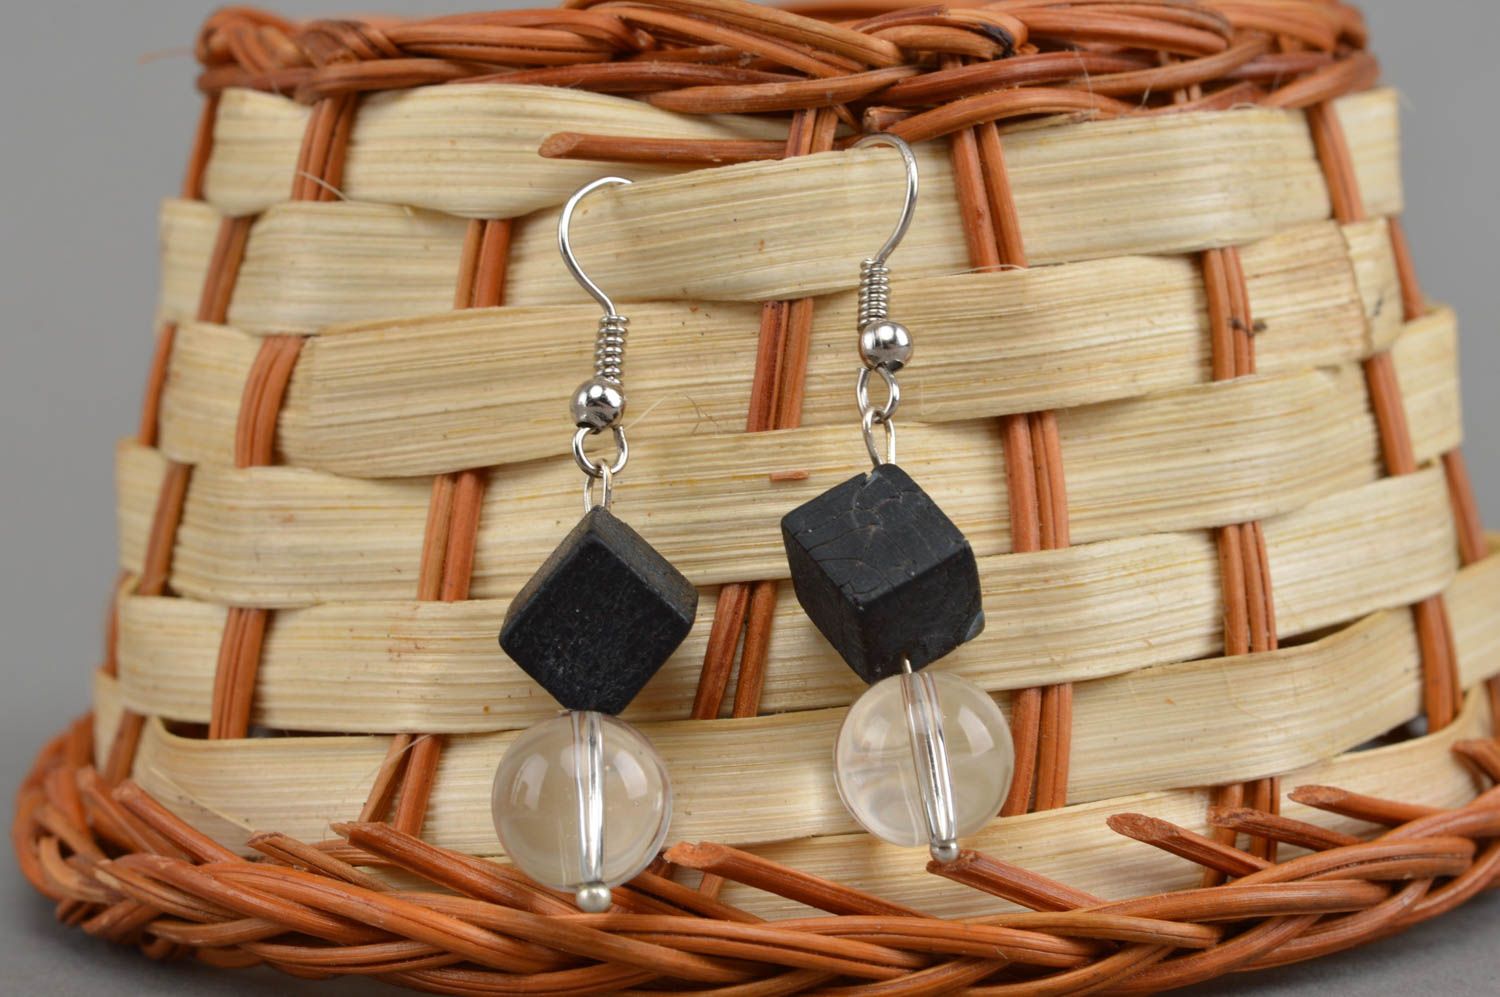 Handmade earrings made of natural stones unusual jewelry stylish accessories photo 1